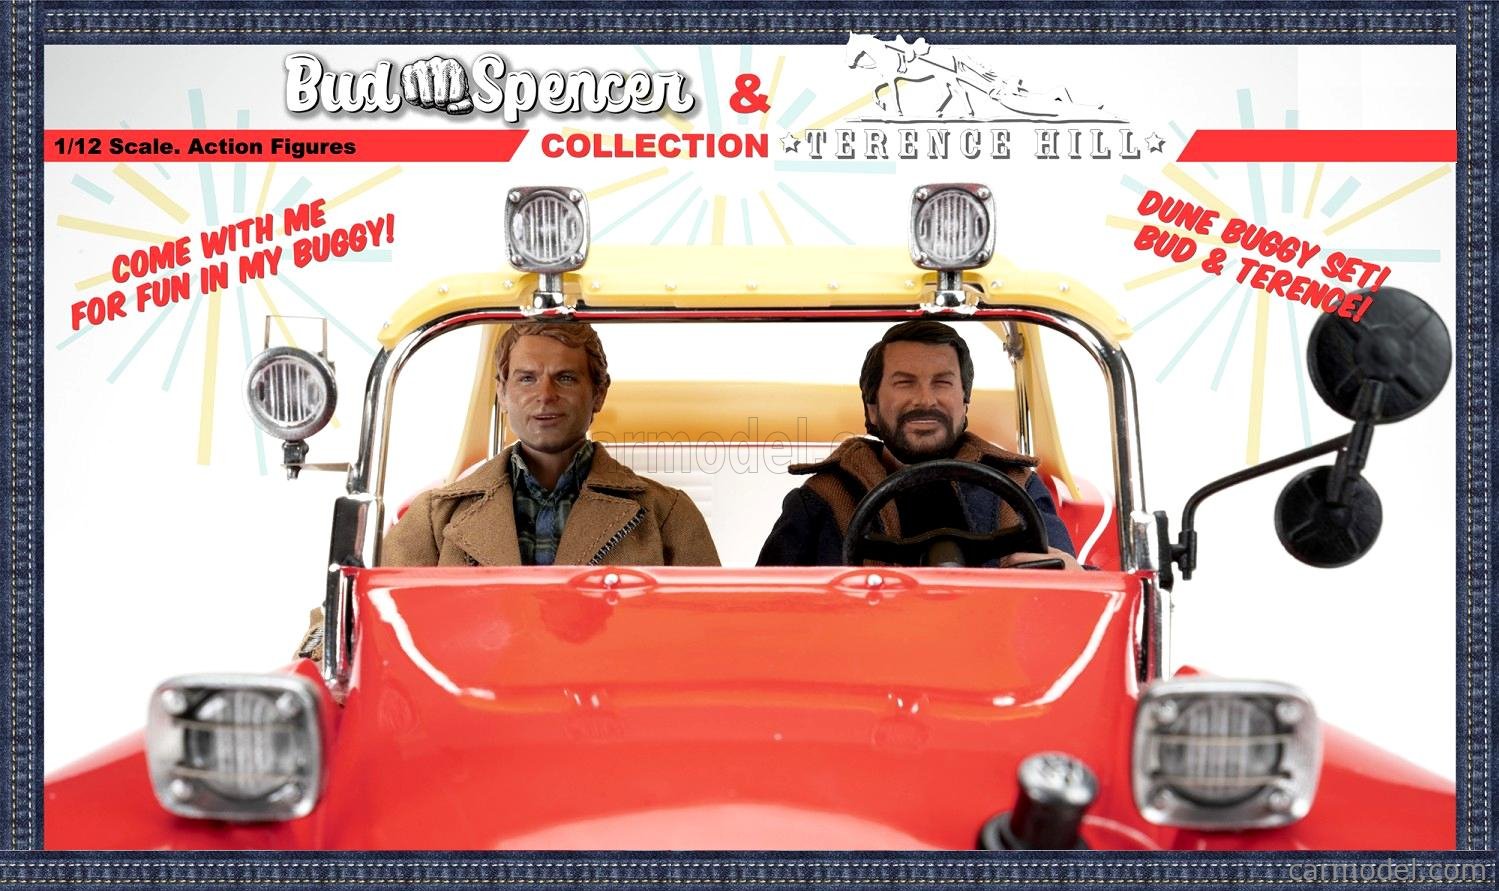 CLC-MODELS 90025+90020+90018 Echelle 1/12  PUMA DUNE BUGGY 1972 - WITH BUD SPENCER AND TERENCE HILL ACTION FIGURES - TV SERIES - ALTRIMENTI CI ARRABBIAMO RED